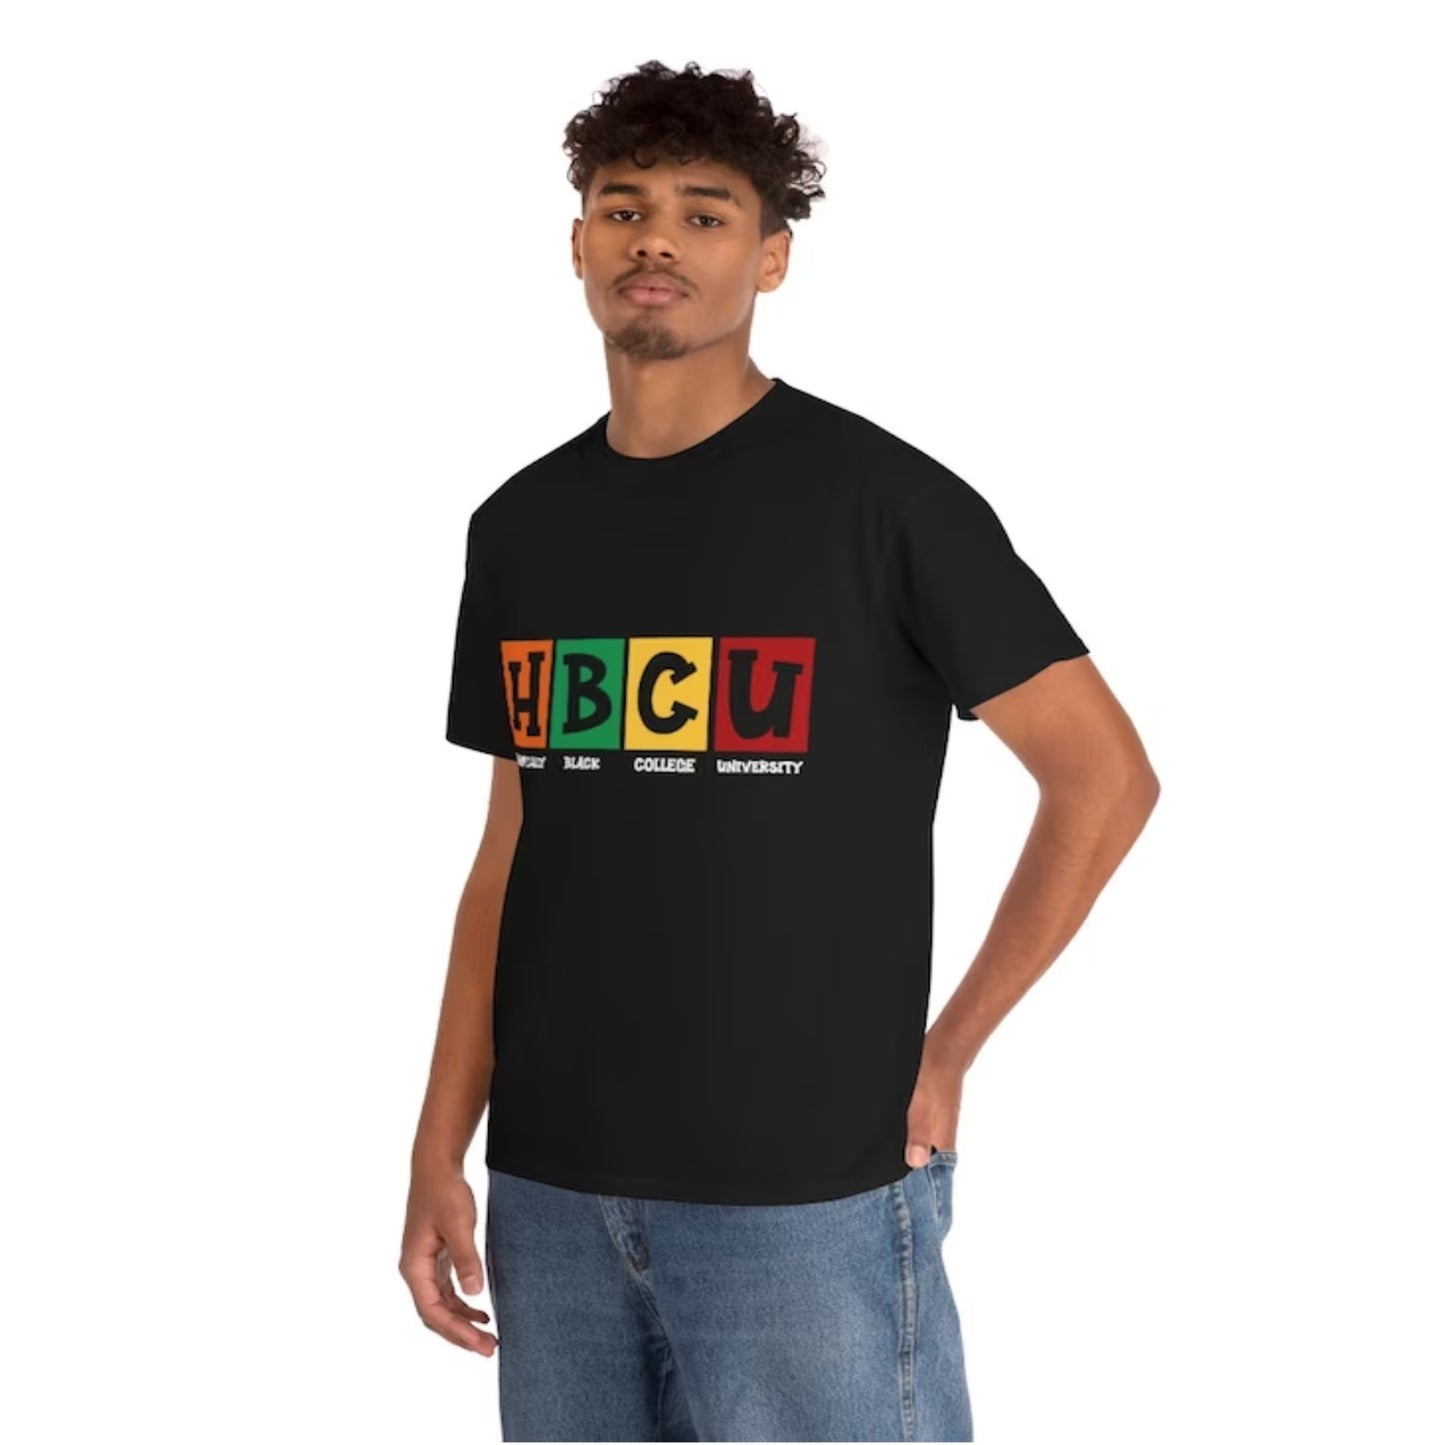 Boxed HBCU 4 Colors shirt. Message us for additional colors or customizations. Contact us form at the bottom of the website